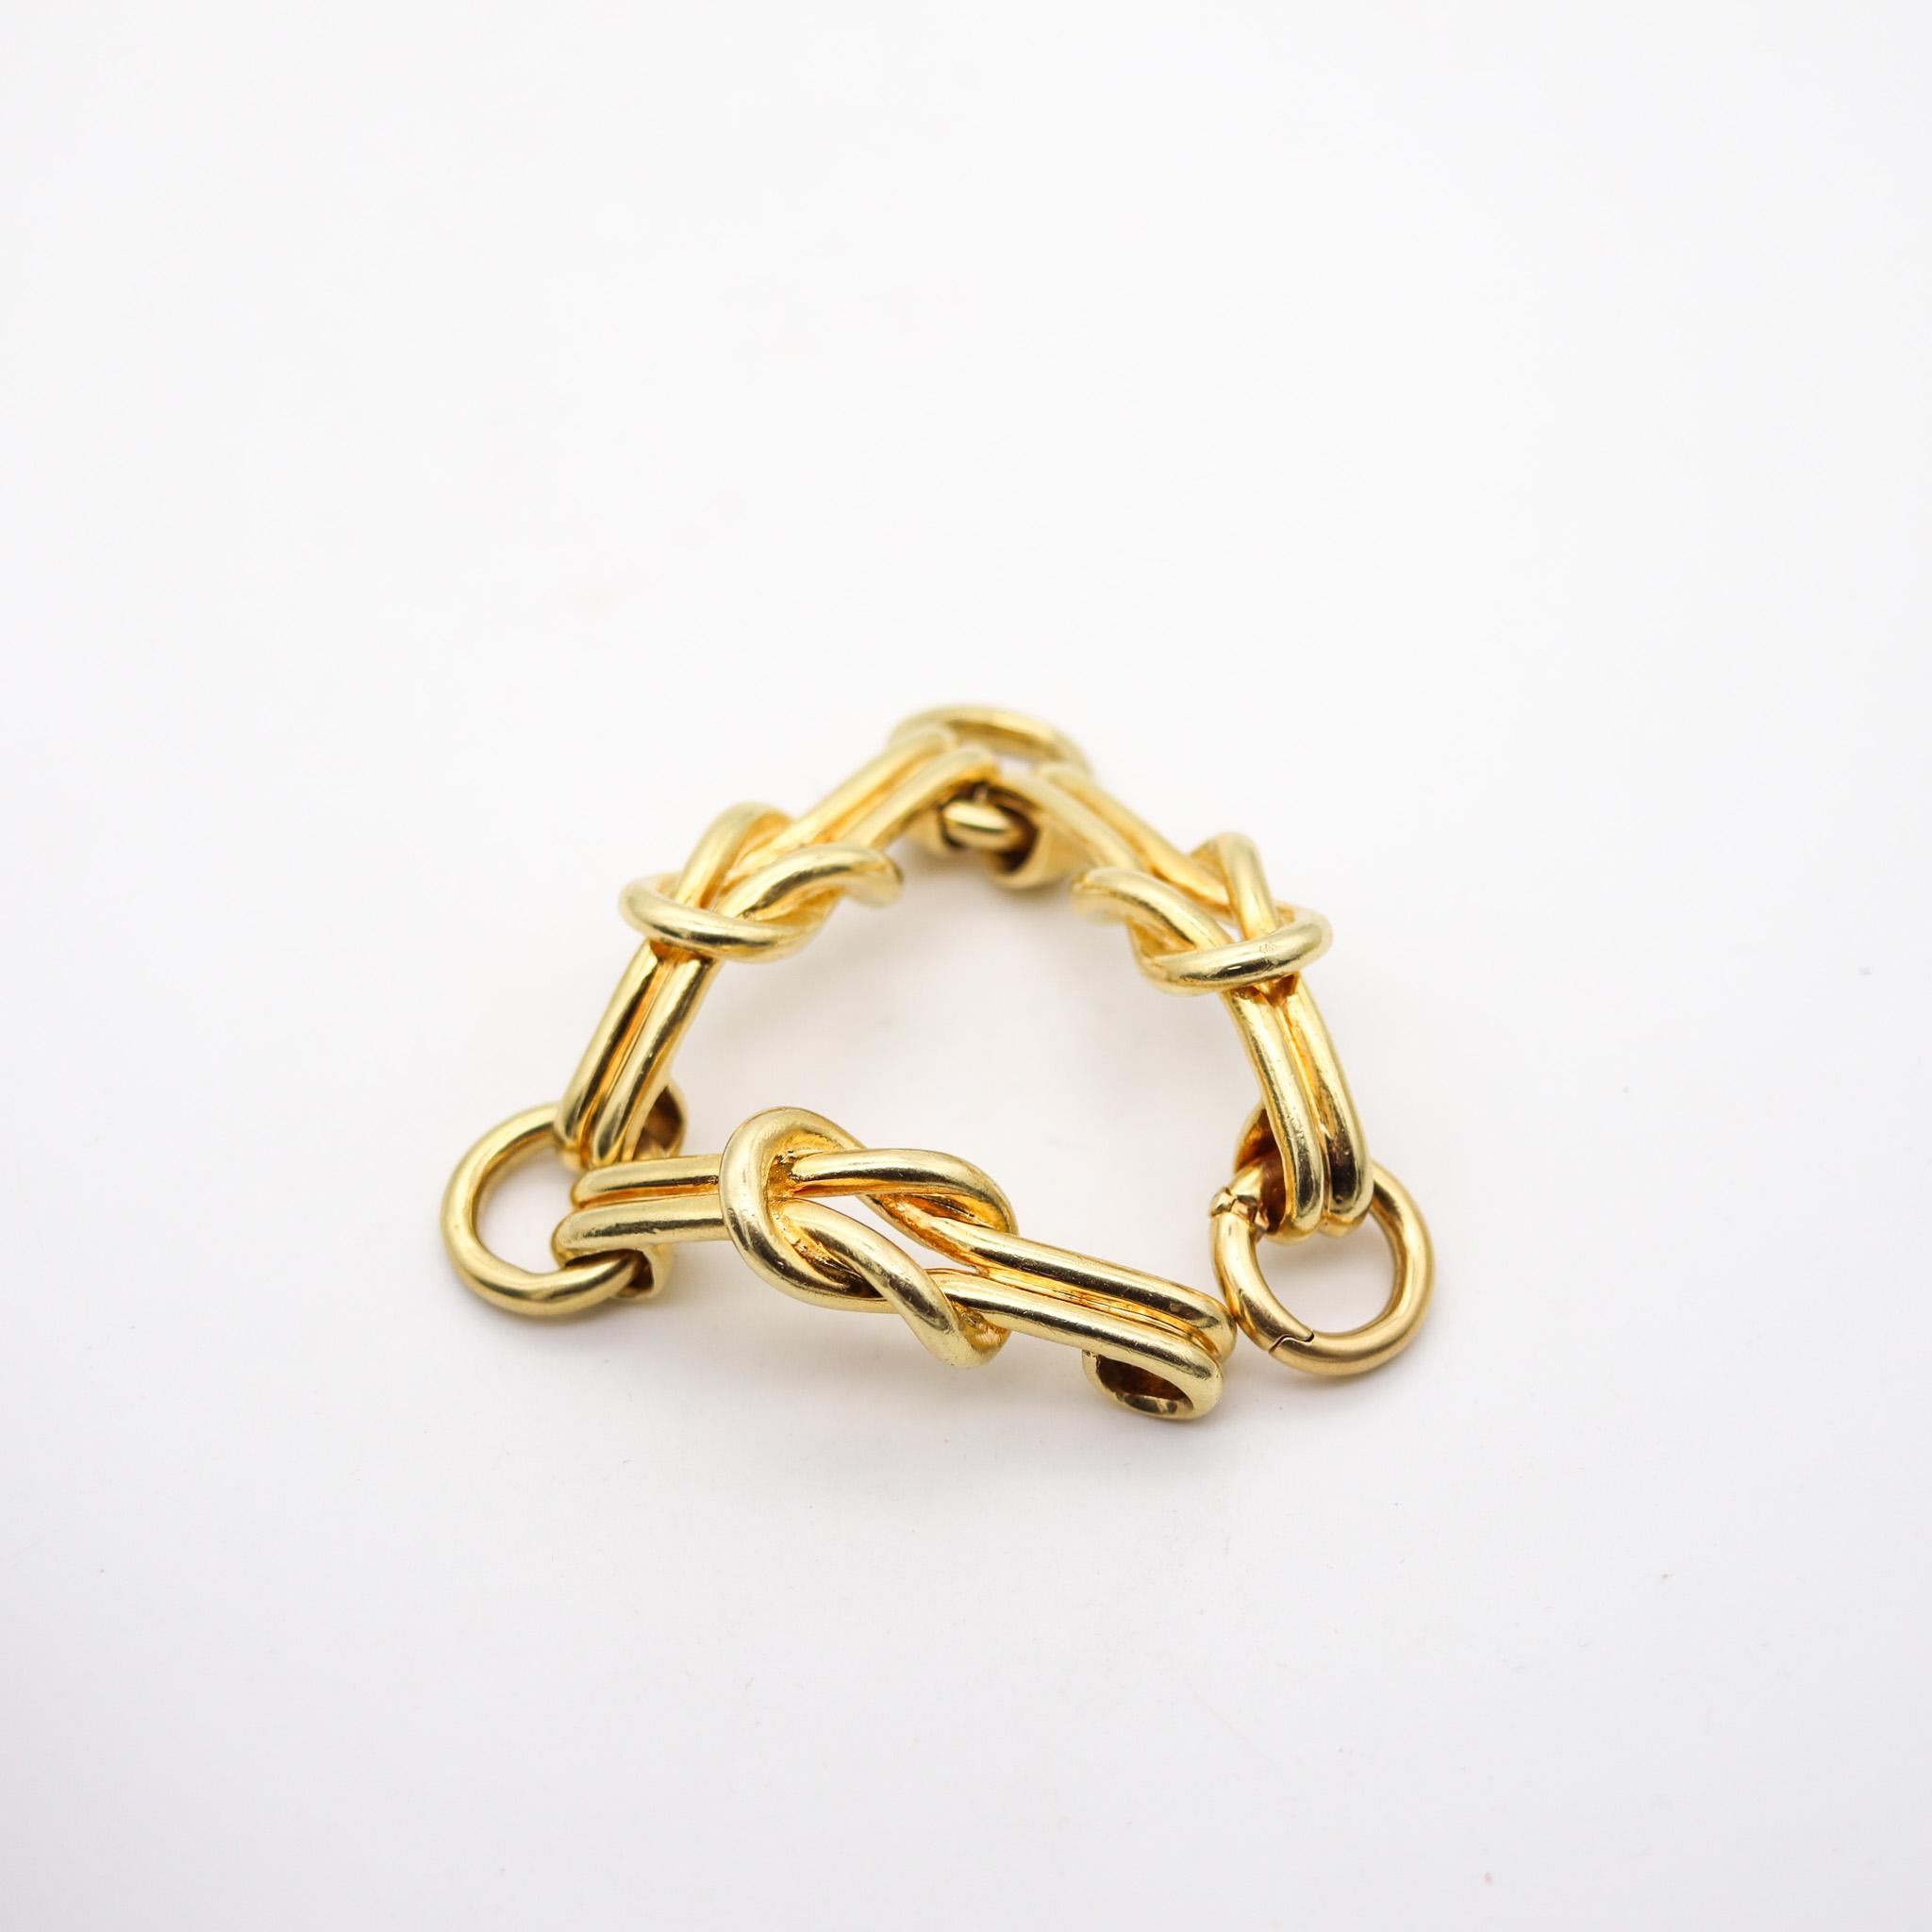 Cartier 1970 Hercules Knots Statement Links Bracelet In Solid 18Kt Yellow Gold For Sale 3